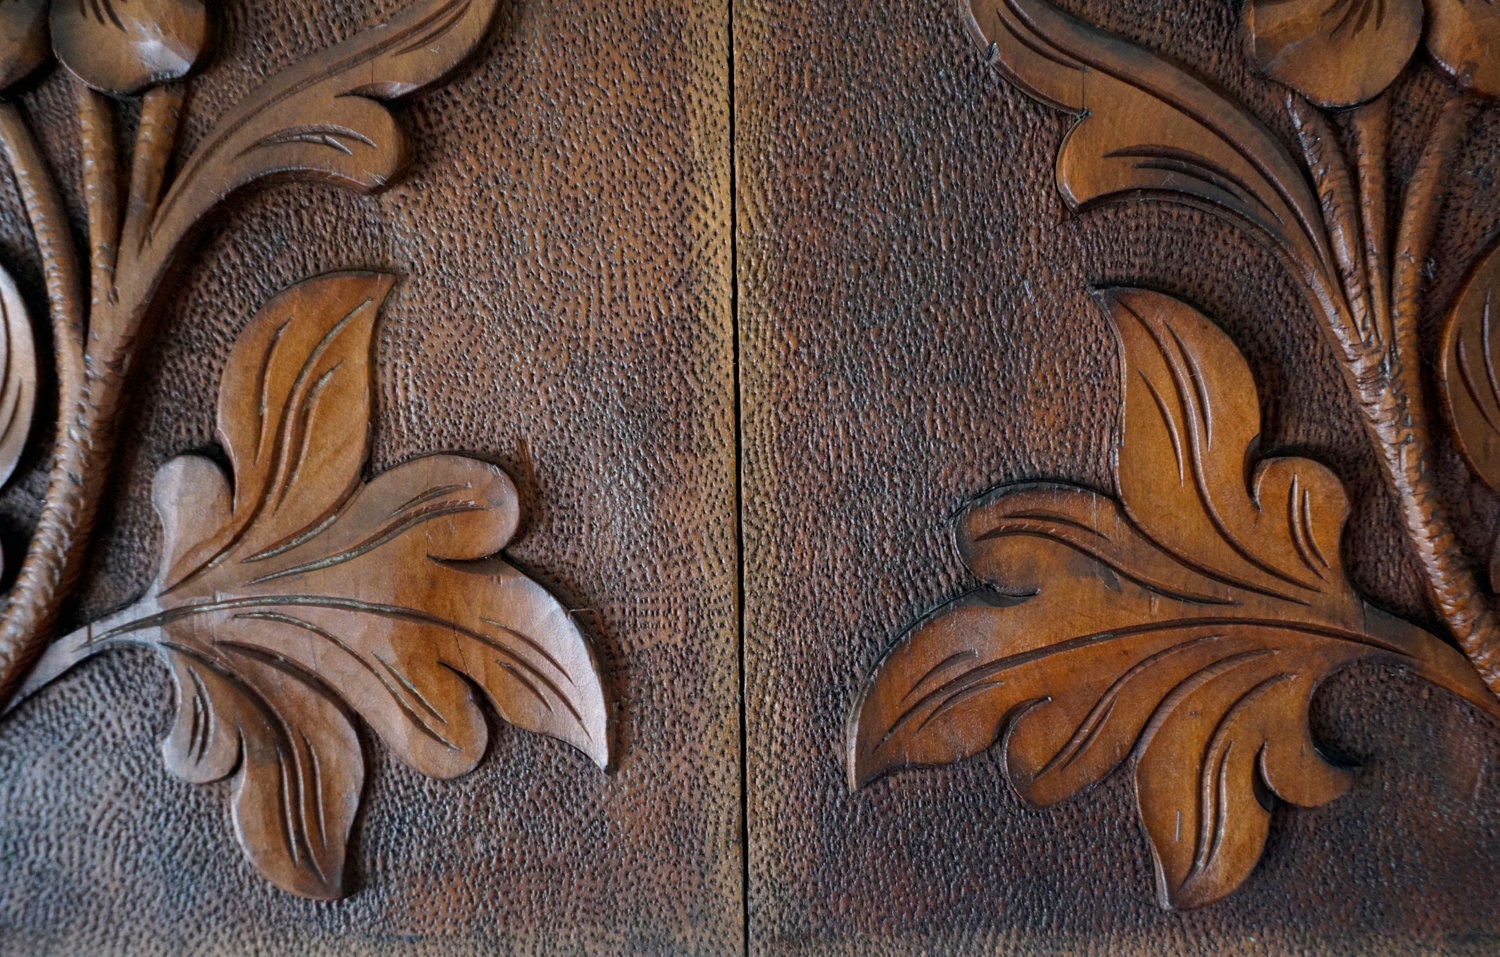 Pair of Antique Hand Carved Cherry Wood Decorative Panels